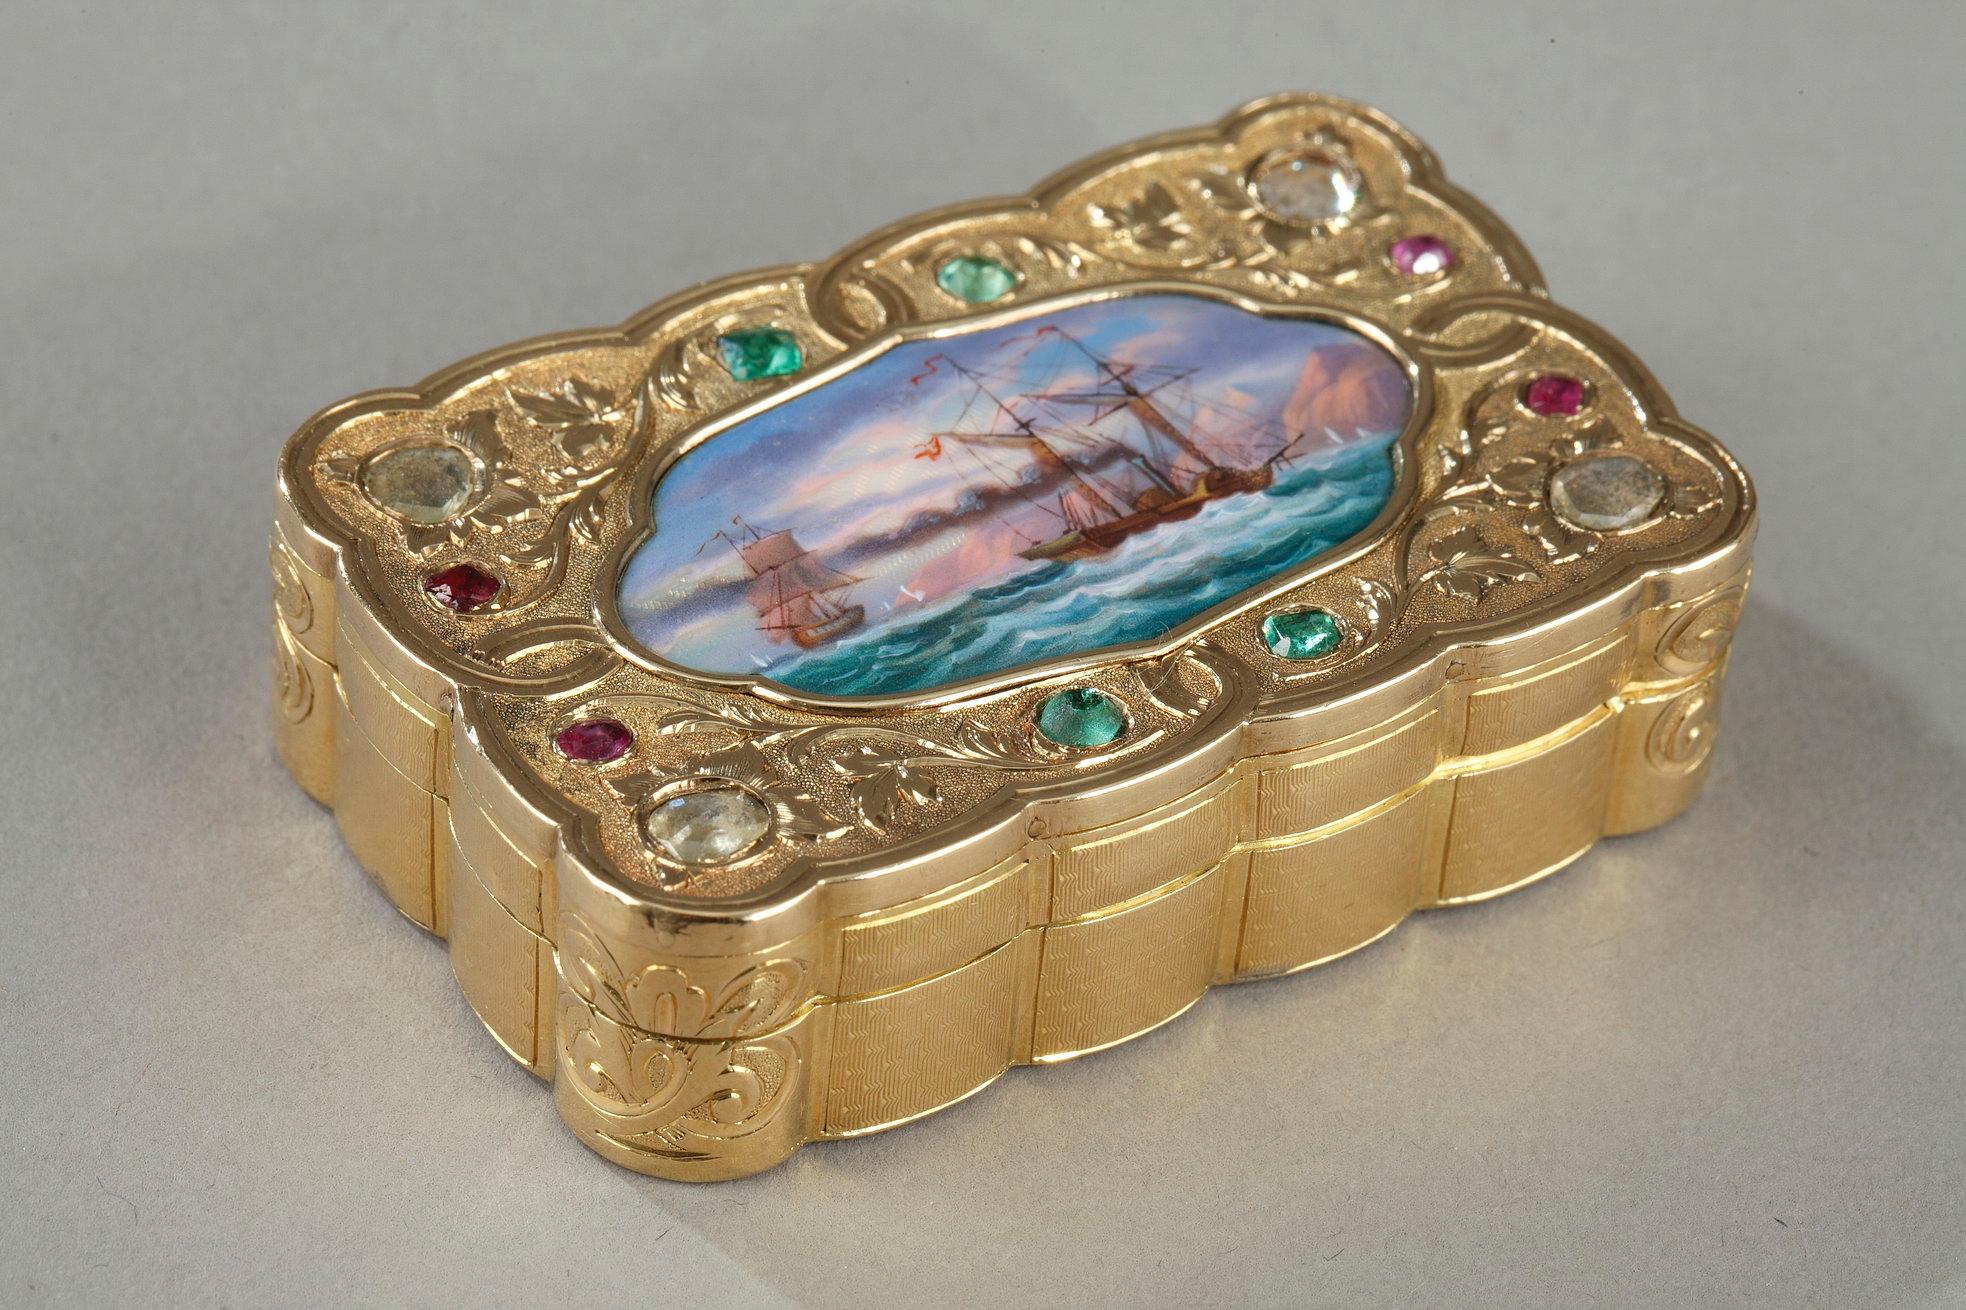 Rectangular and scalloped snuff box in gold and fine stones. The hinged lid is decorated in the center with a naval scene; Steamboat; standing out against a translucent and opalescent background revealing a fine guilloche pattern. This scene is